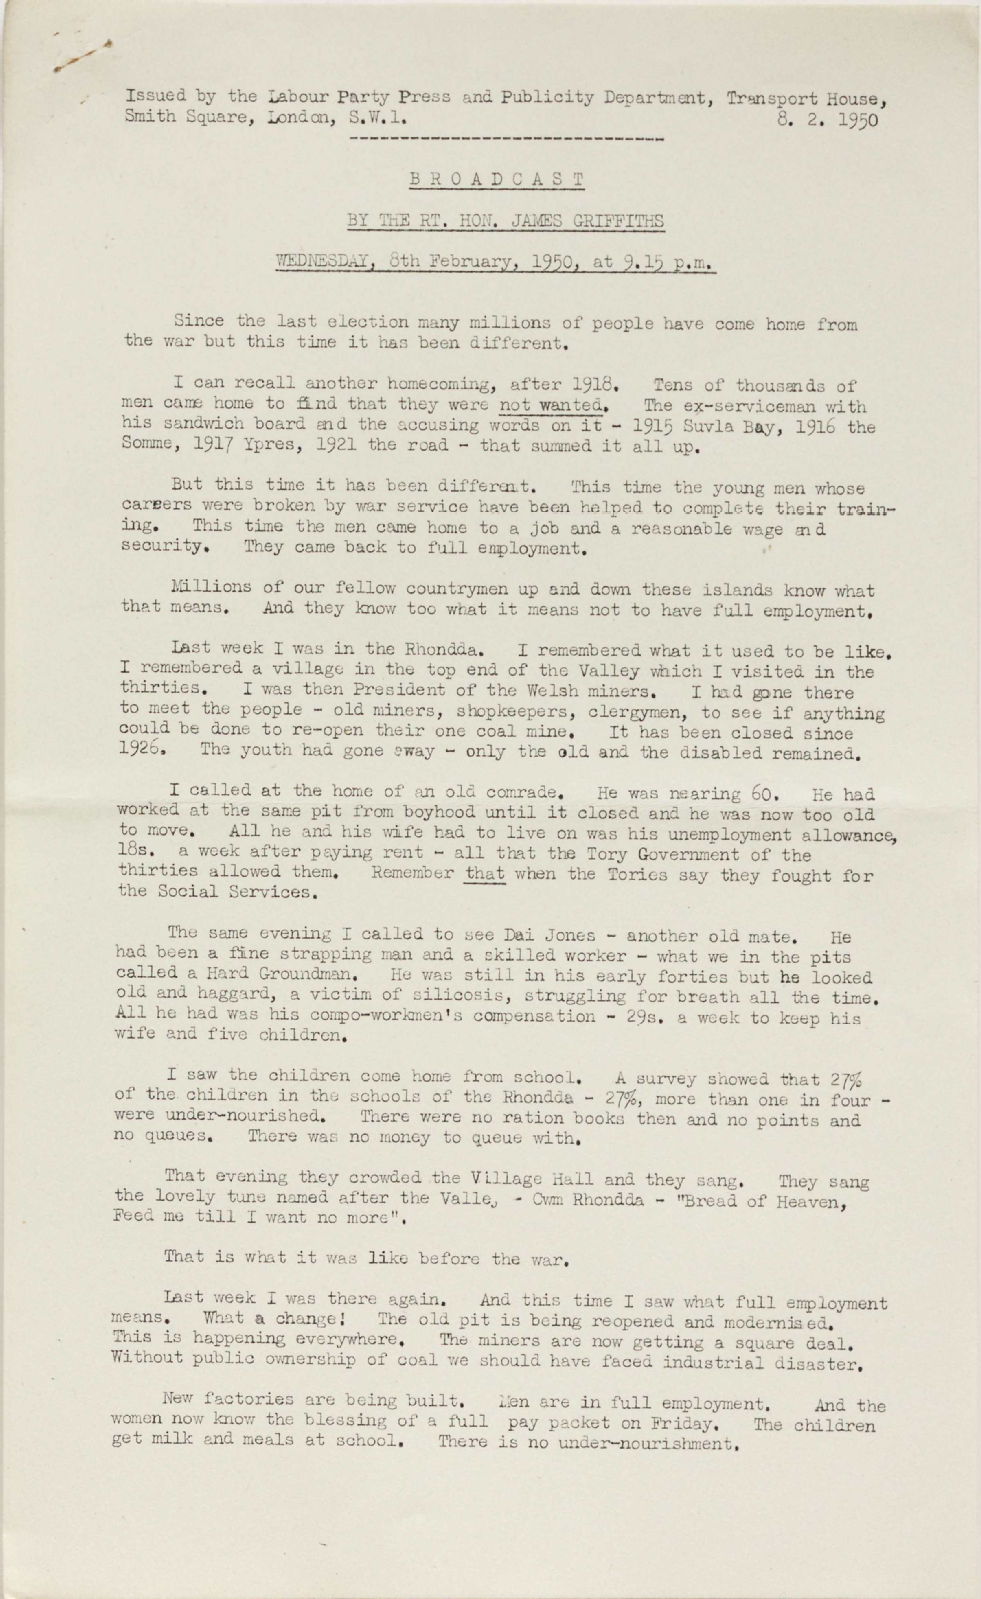 Text of election broadcast, 1950